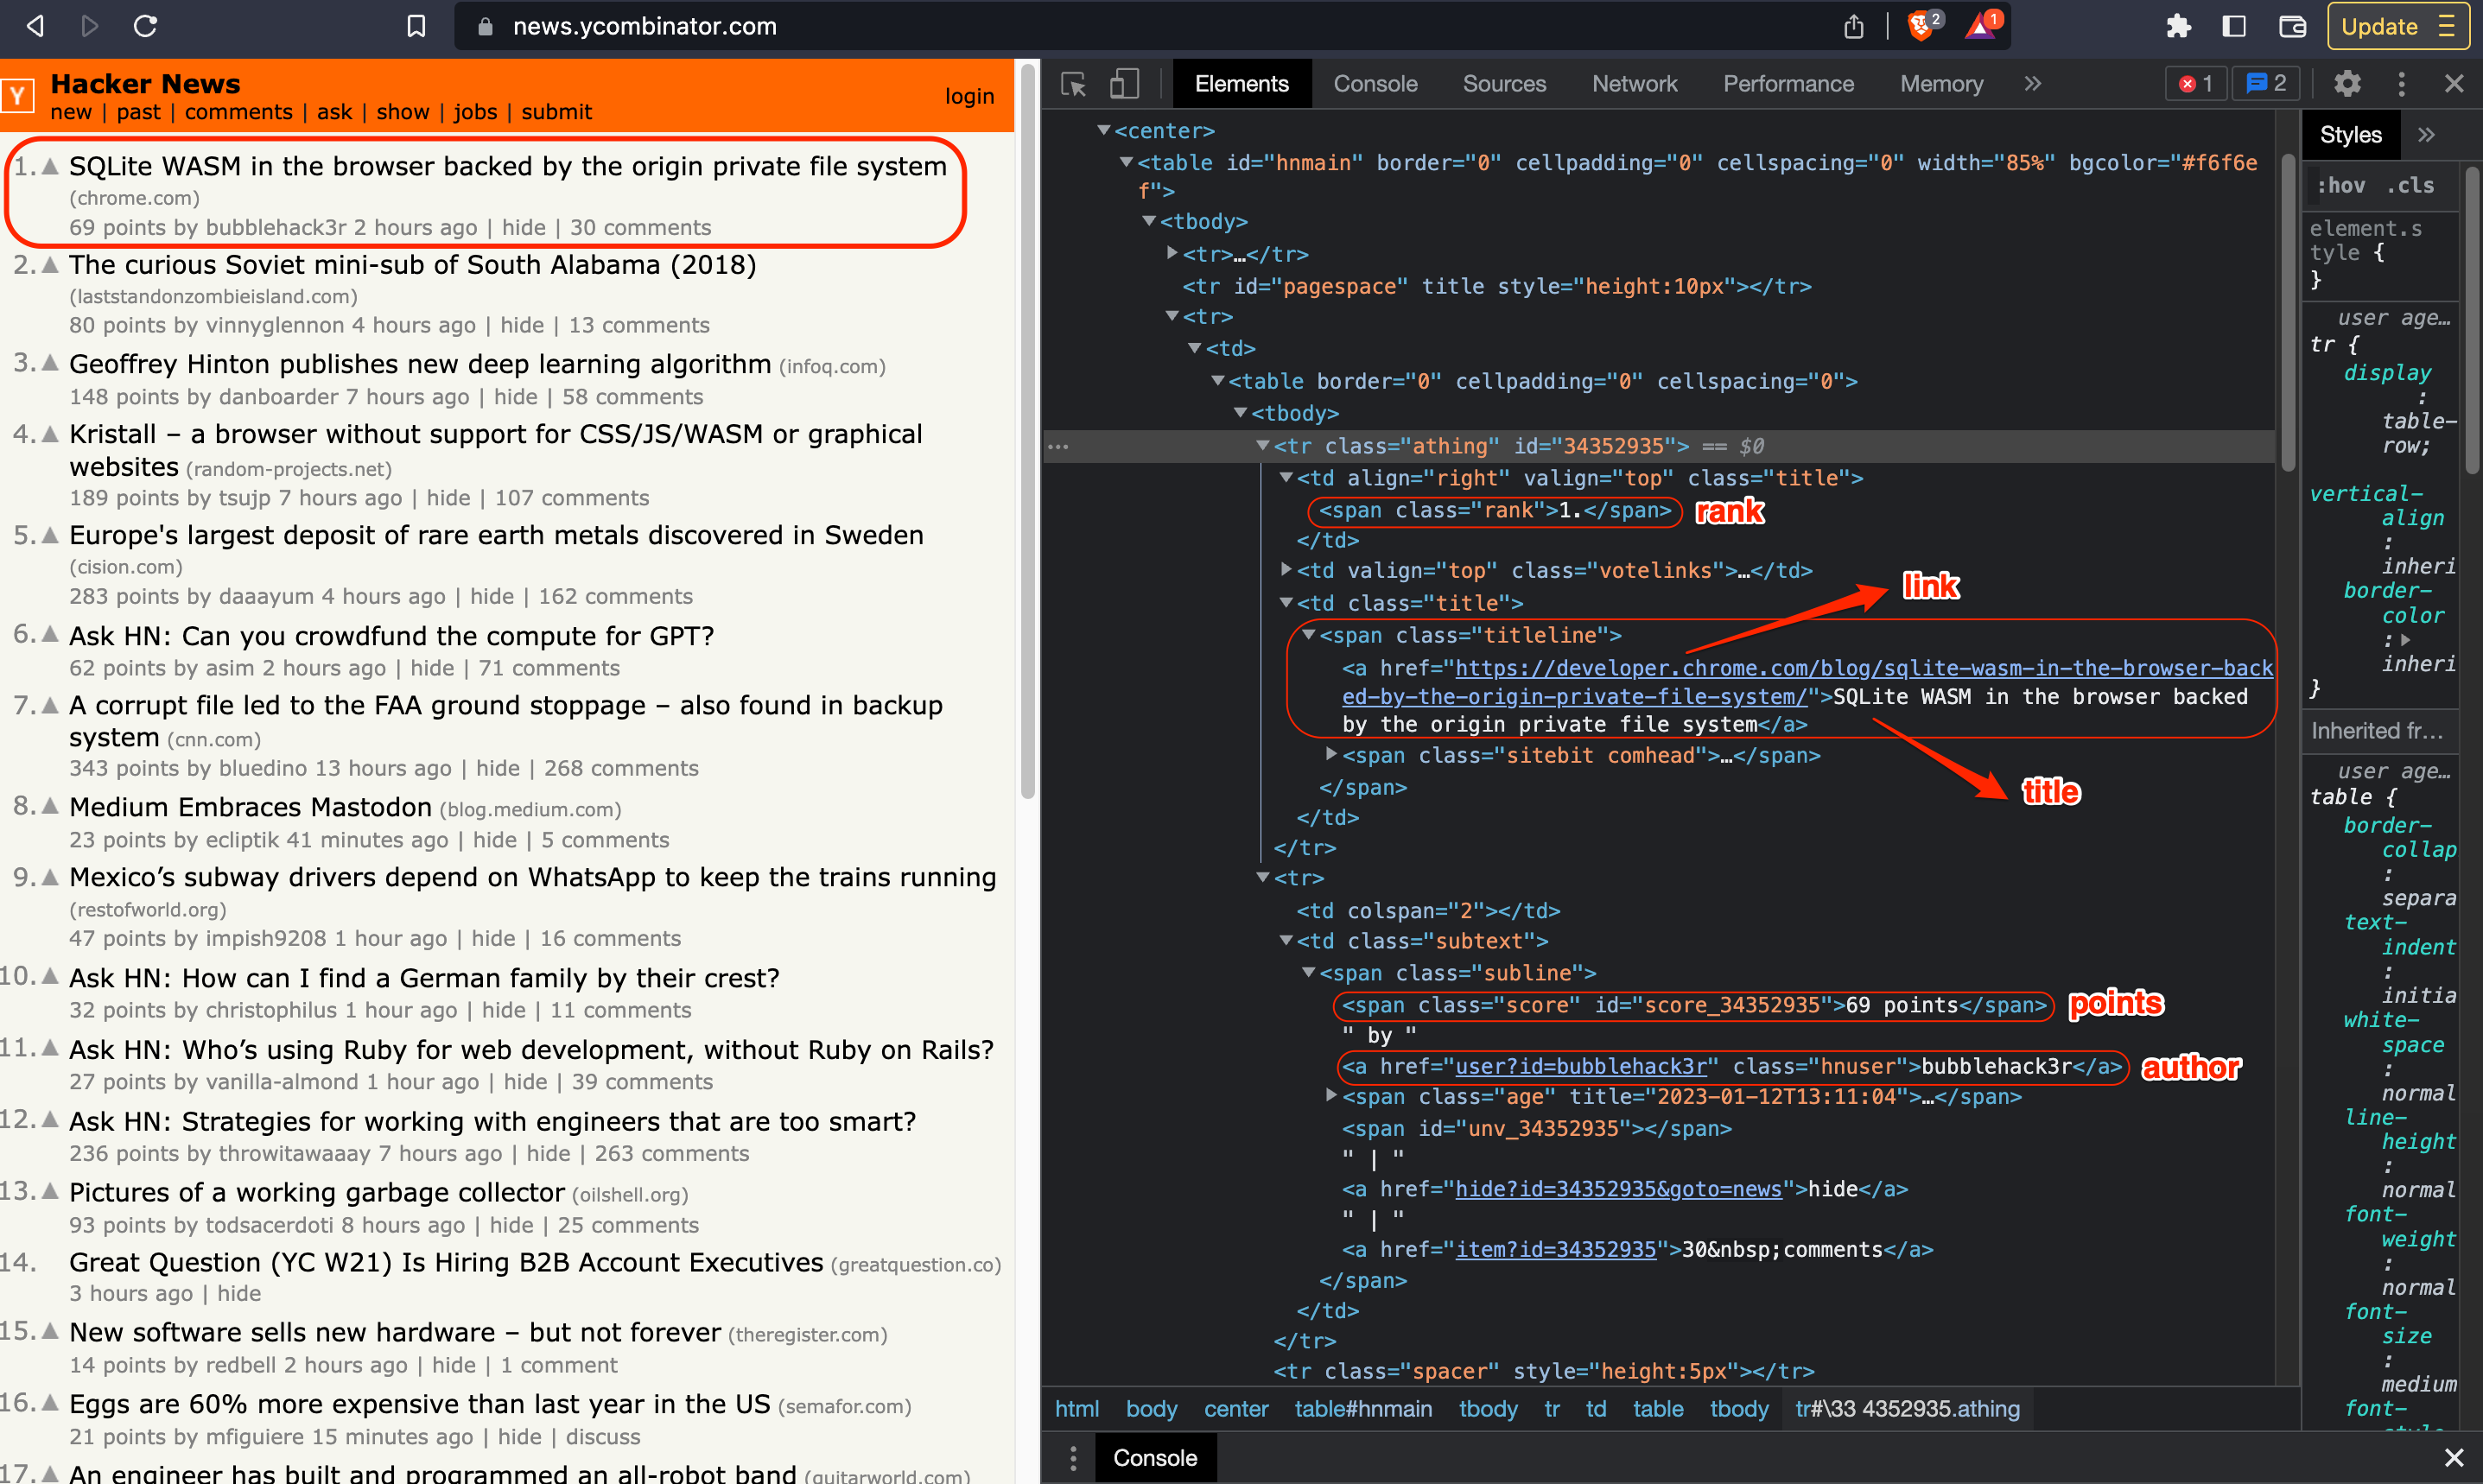 Element selectors illustrating the CSS selectors used on the Hacker News website